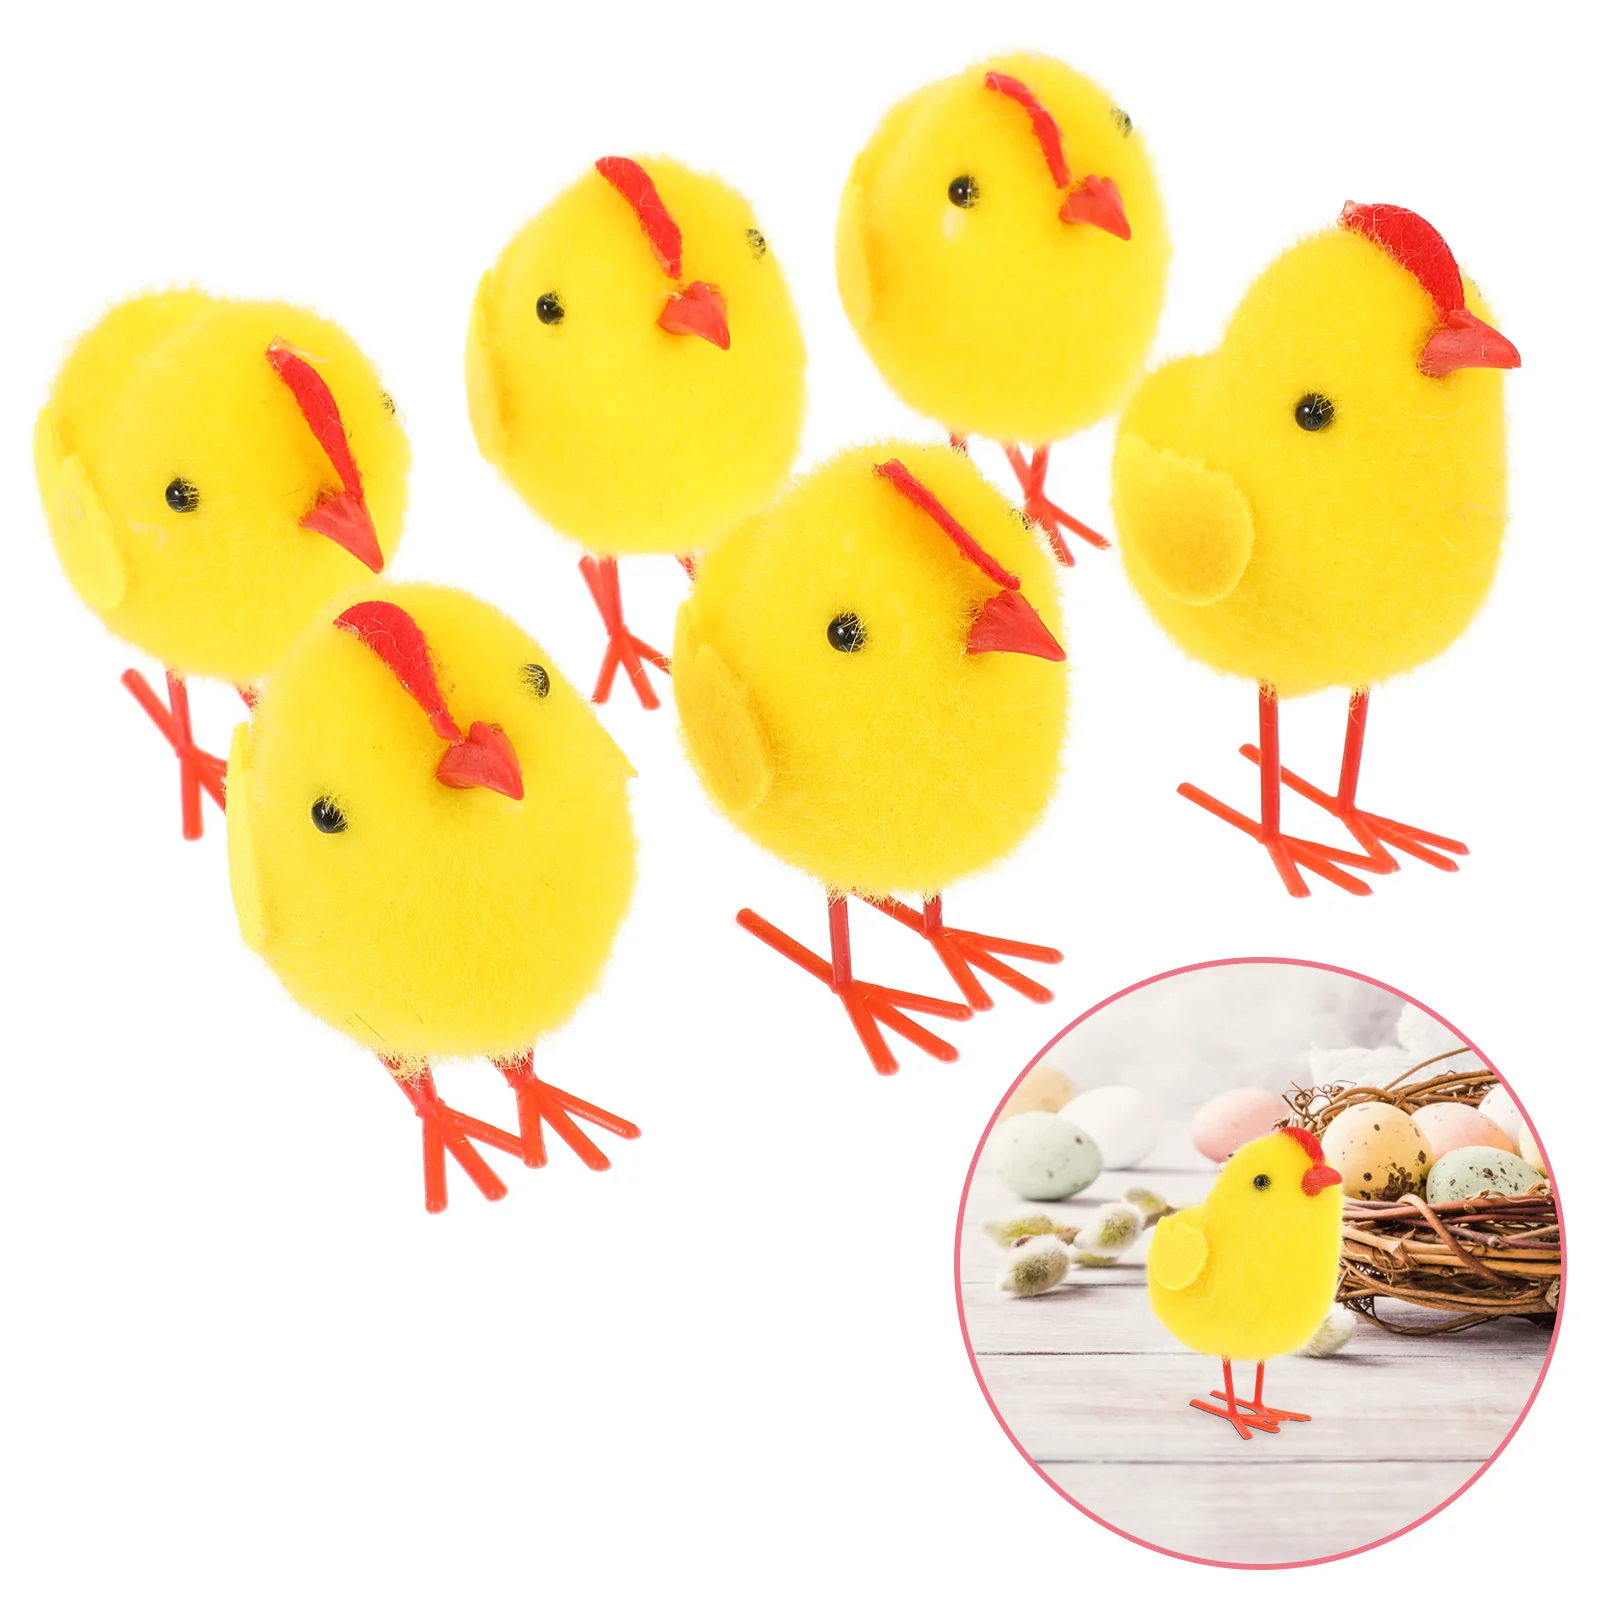 

Chicken Easter Chick Chicks Plush Toy Toys Stuffed Animal Mini Decoration Ornament Party Baby Decor Figurine Favors Yellow Furry